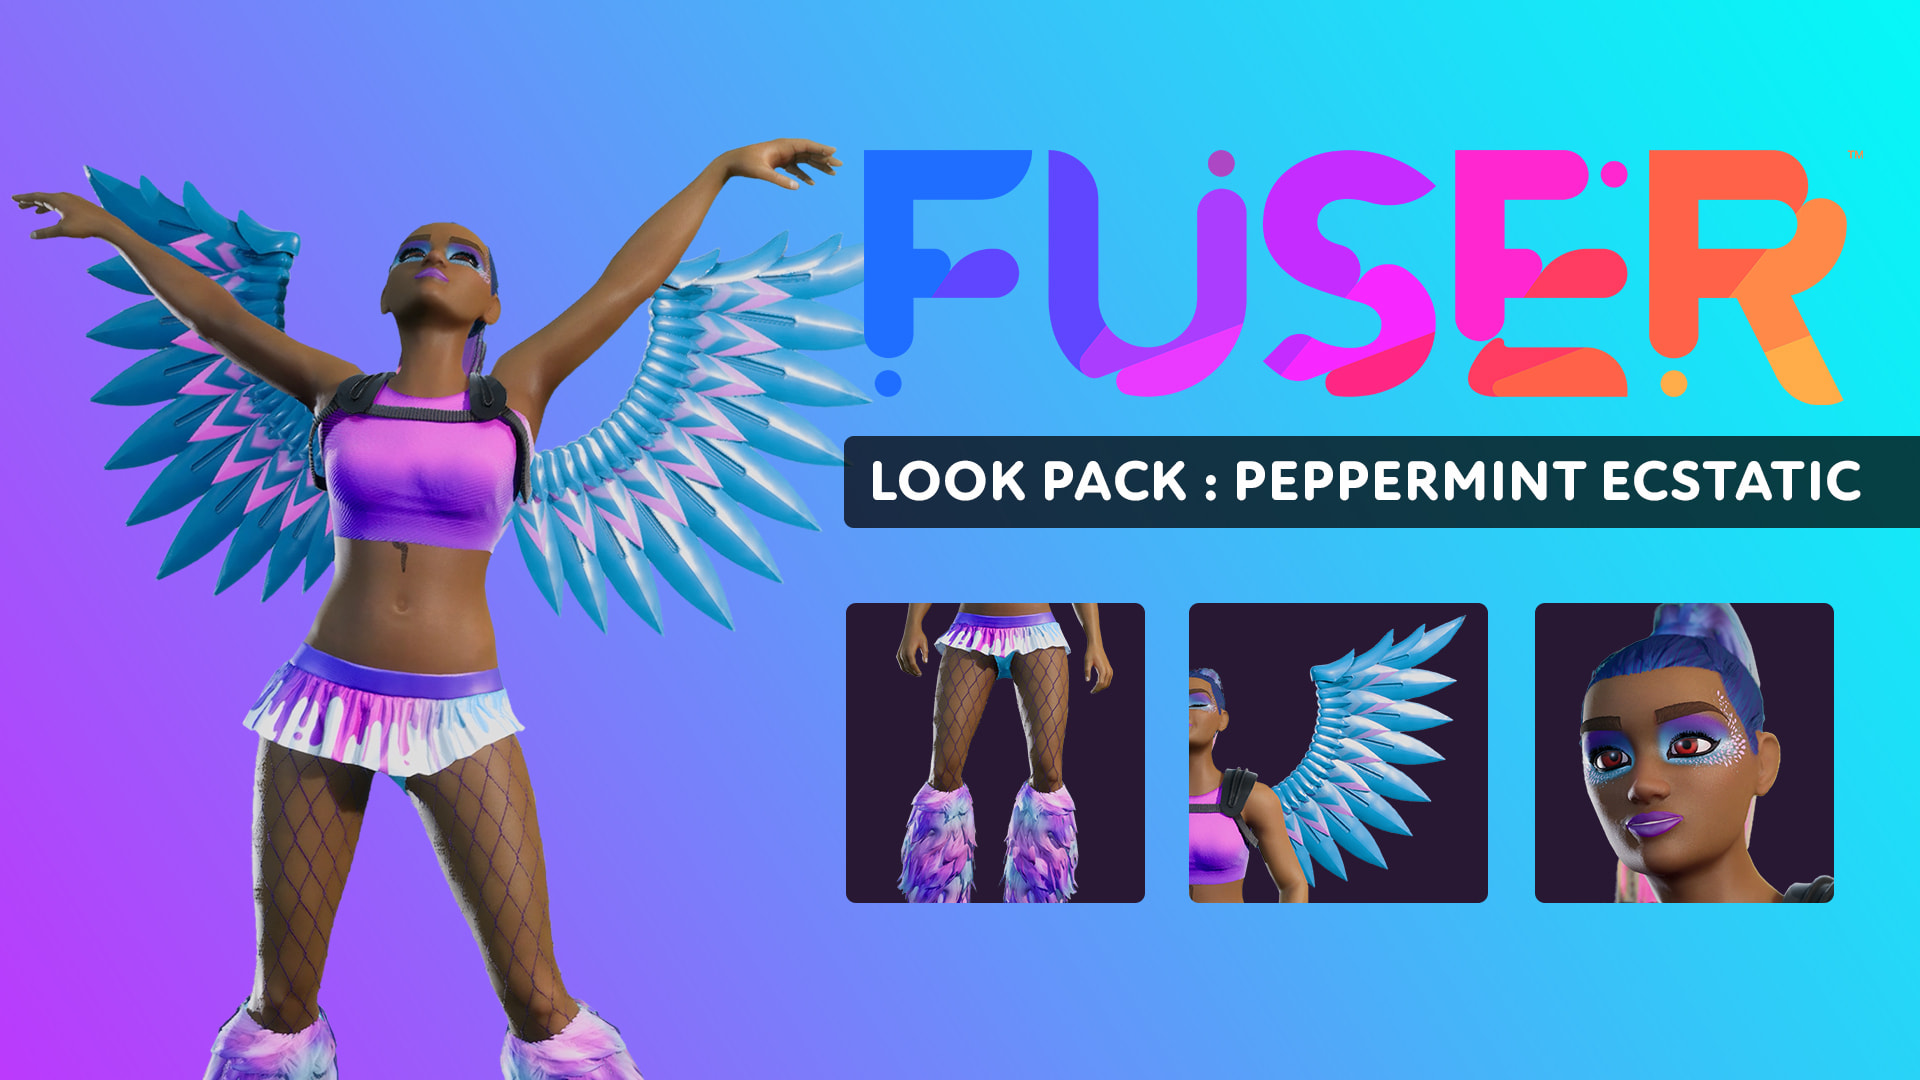 Look Pack: Peppermint Ecstatic